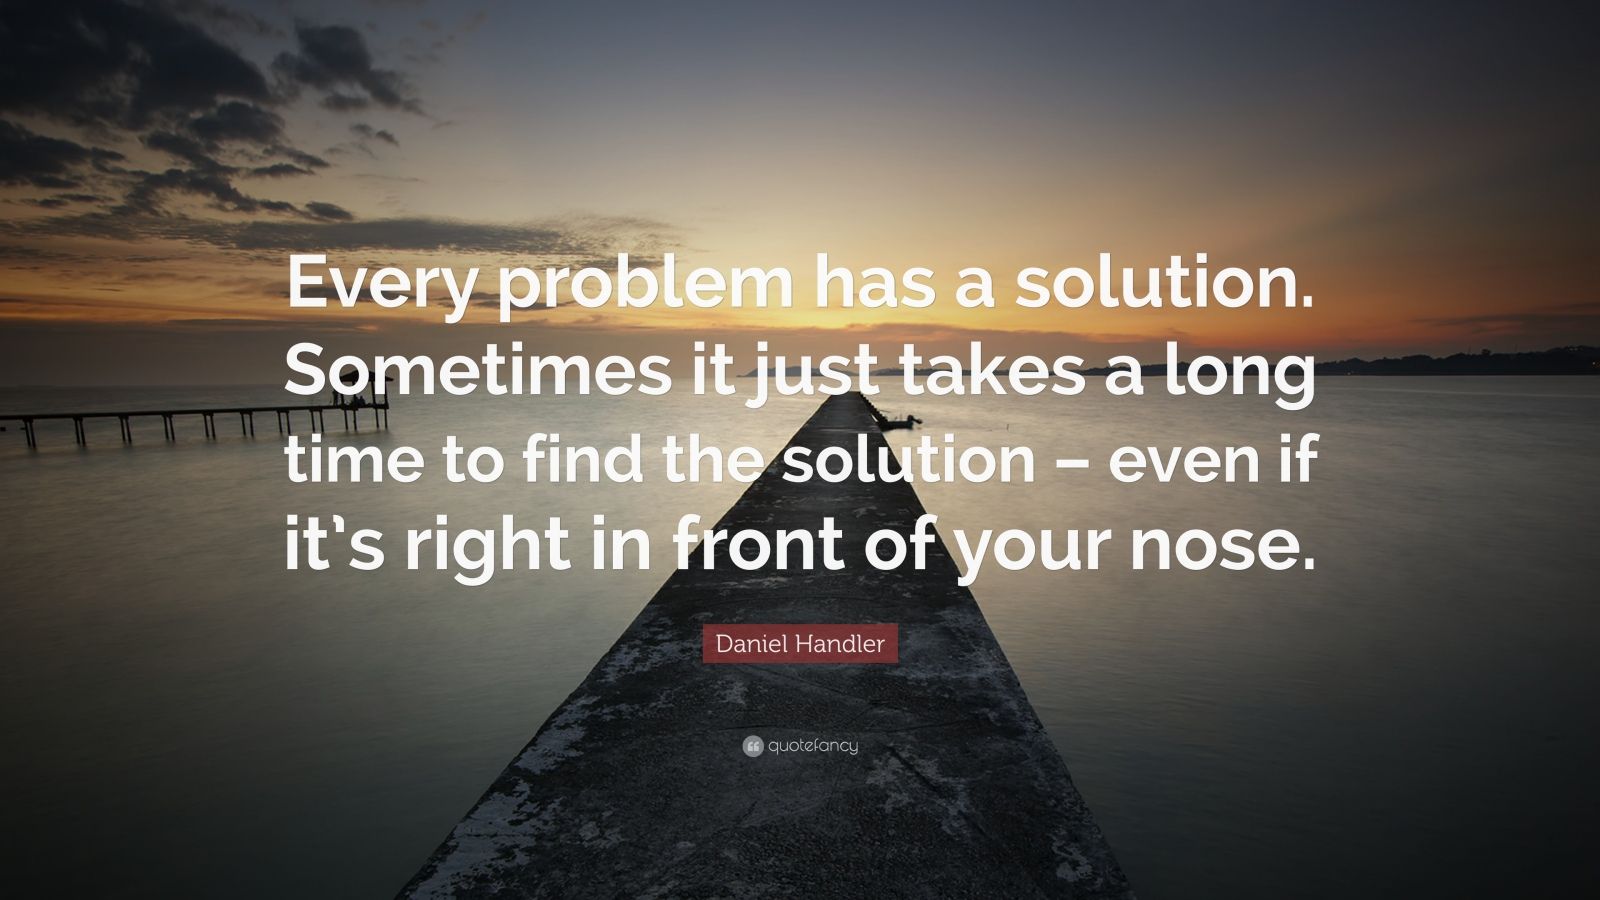 Daniel Handler Quote: “Every problem has a solution. Sometimes it just